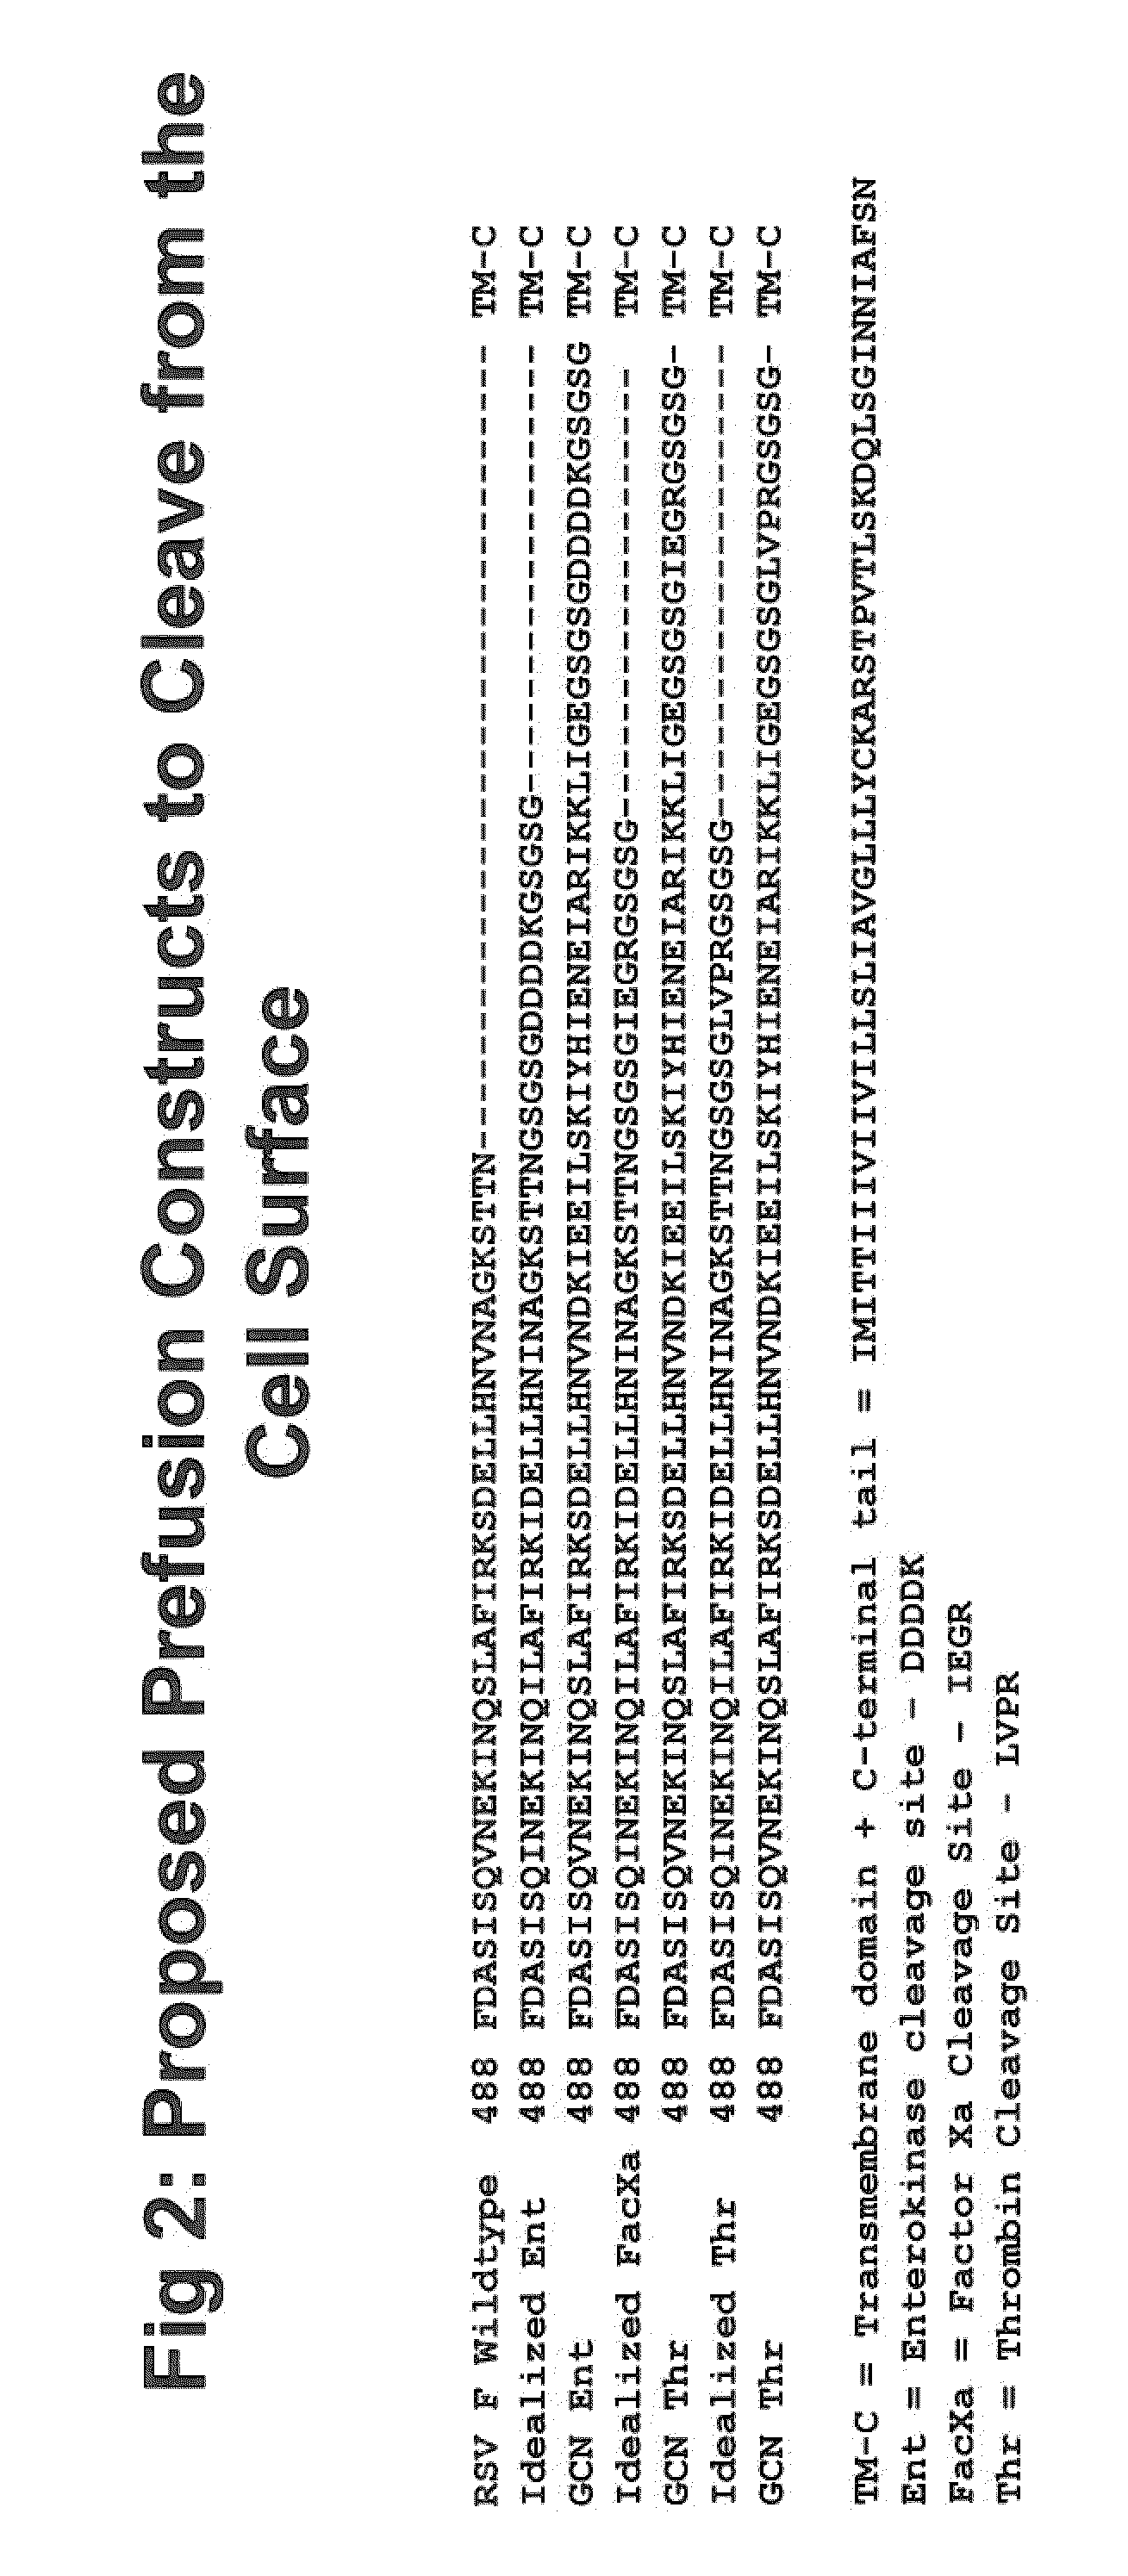 Rsv f protein compositions and methods for making same